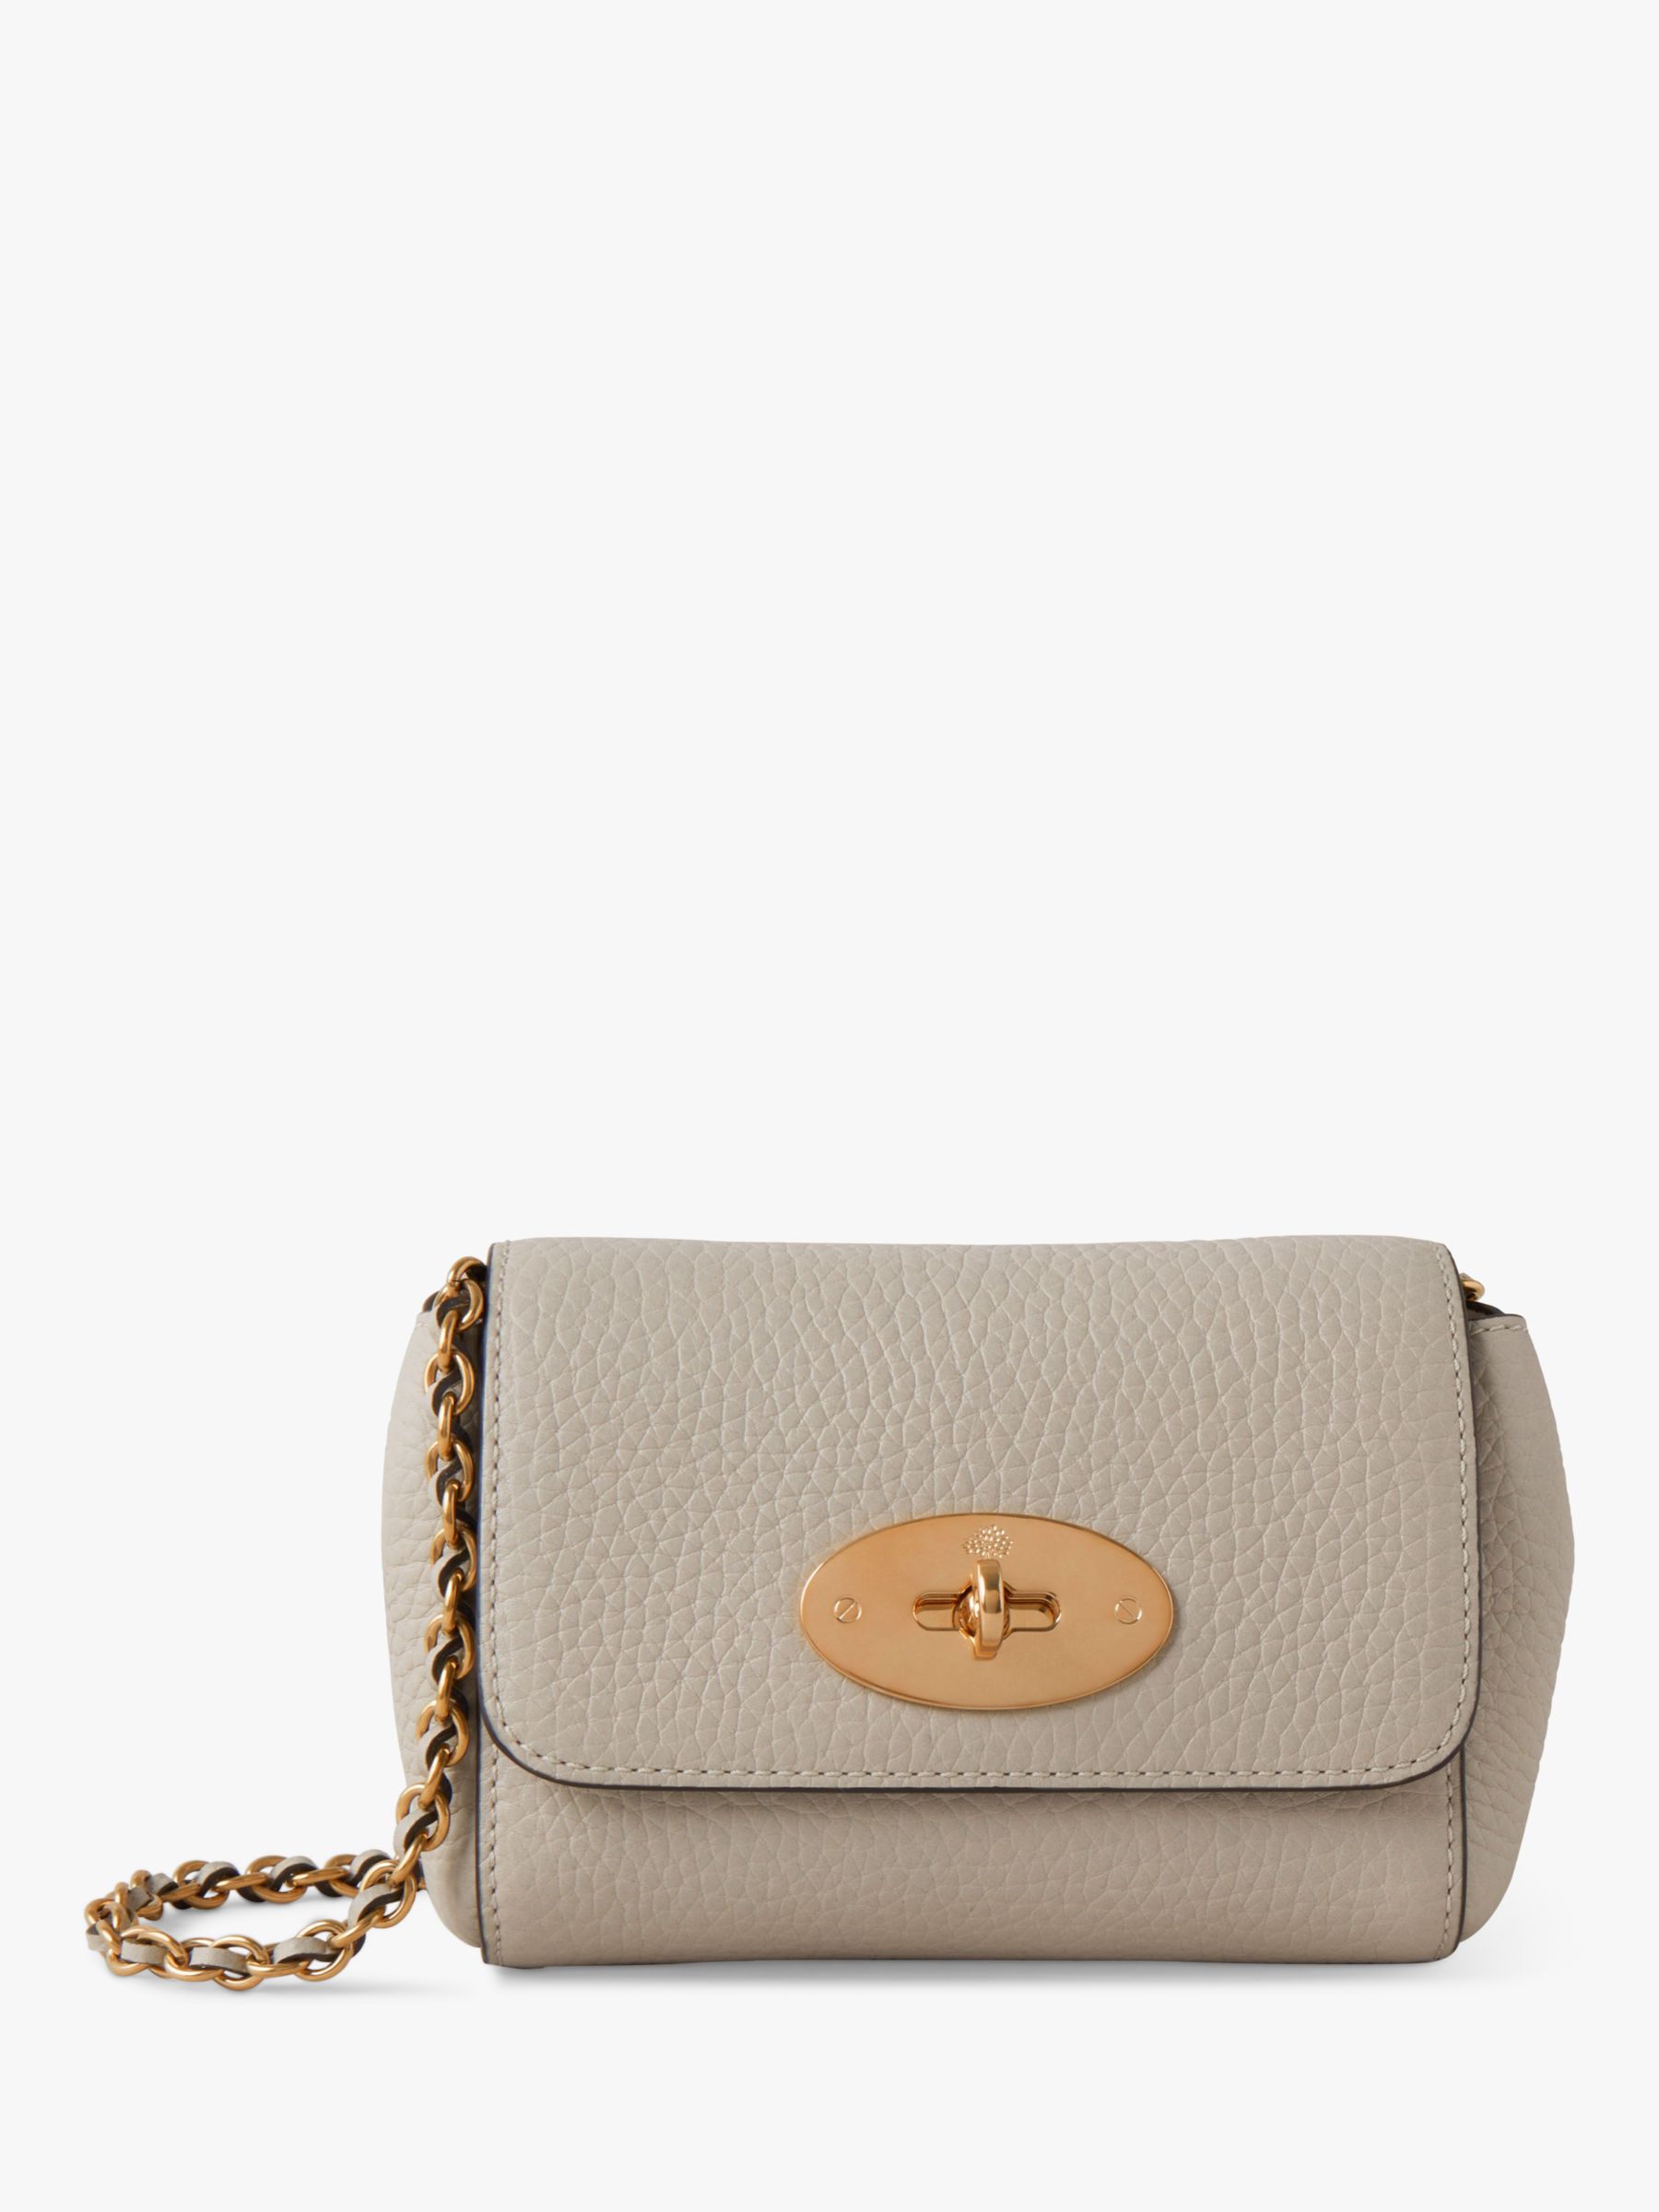 Mulberry Lily Small Shoulder Bag - Farfetch